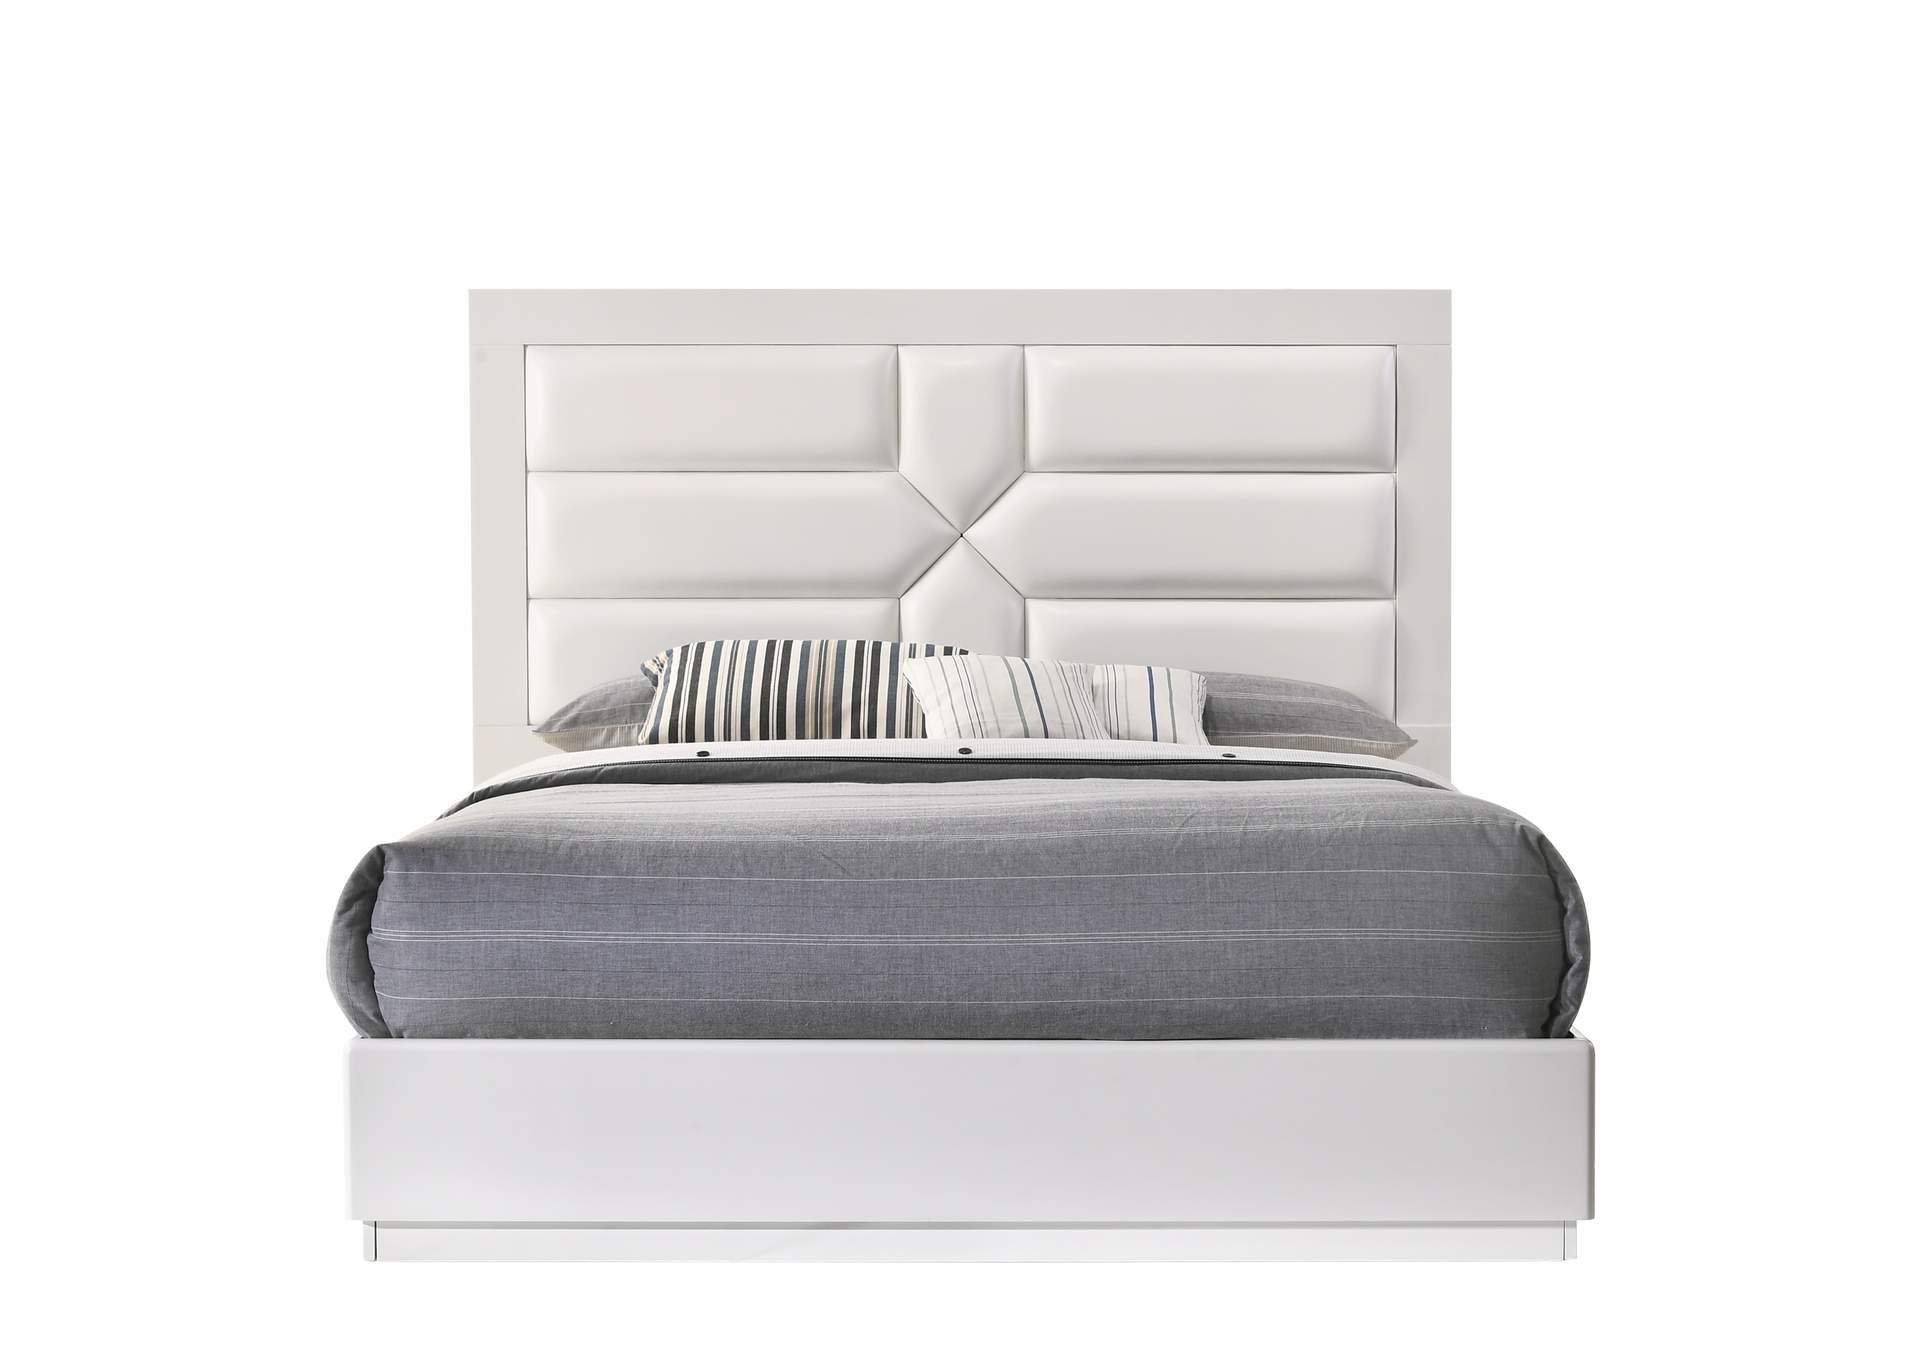 King Bed Headboard,Chintaly Imports